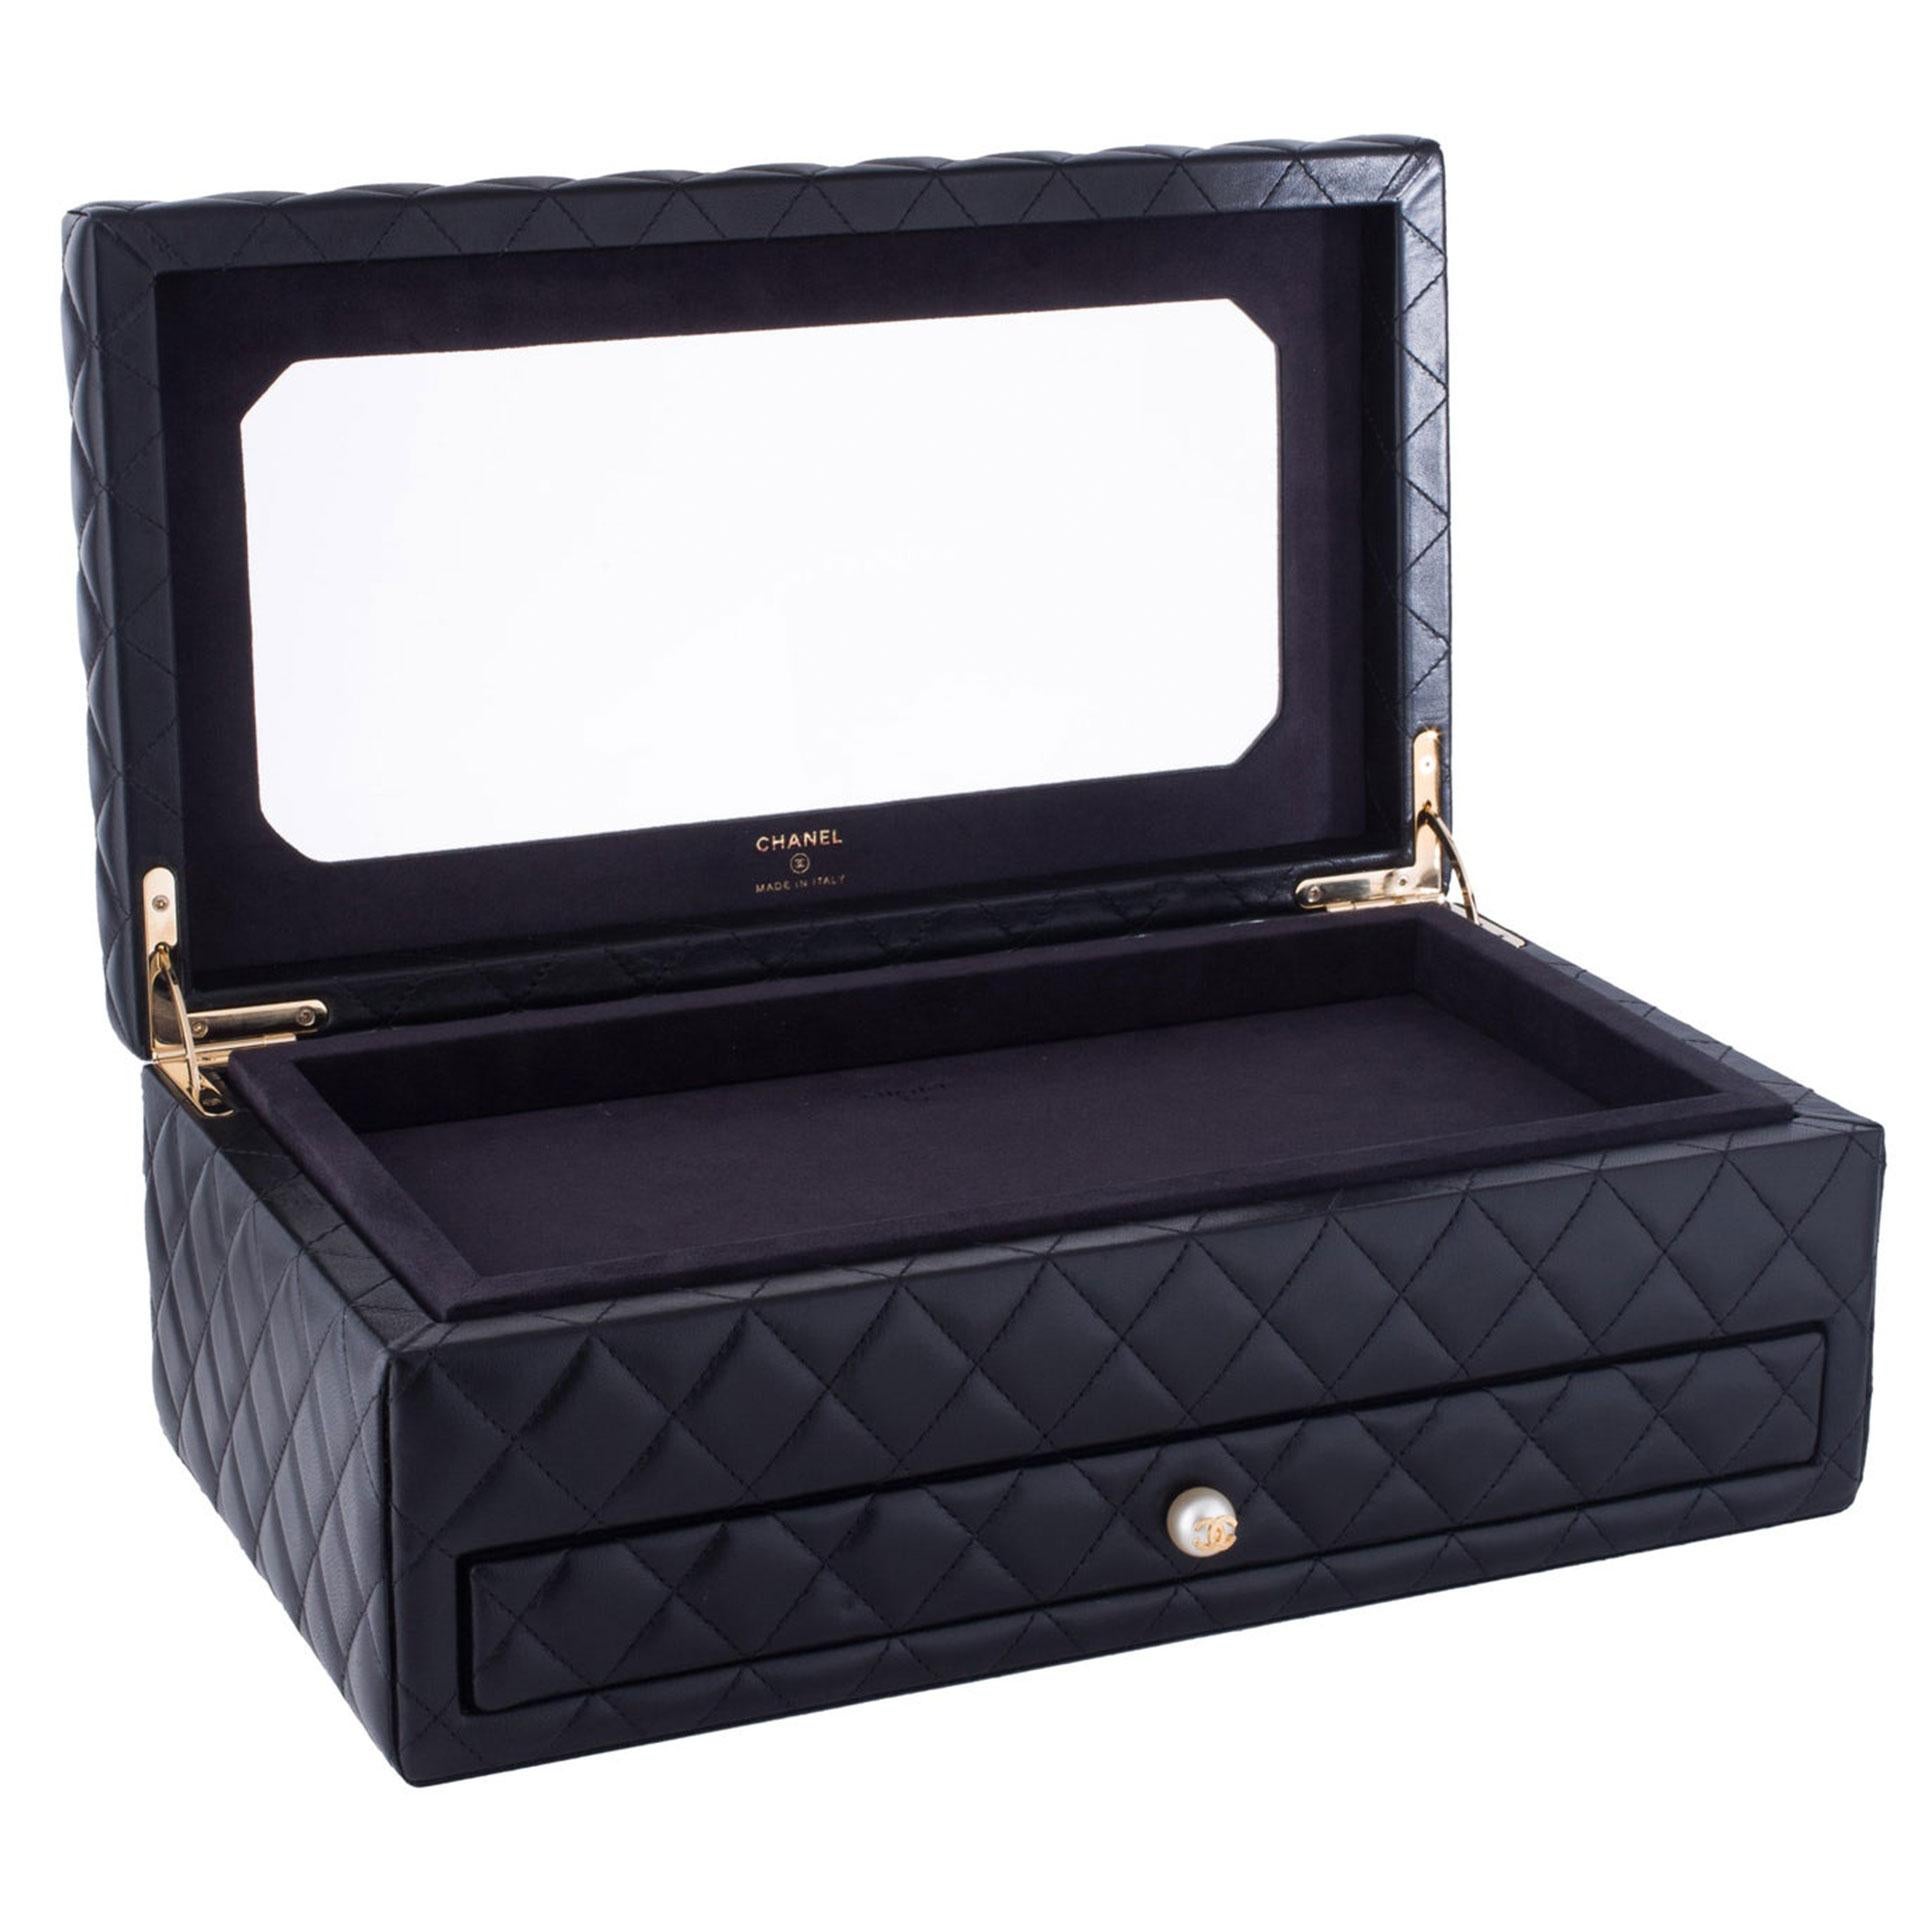 Chanel Quilted Trunk Pearl Limited Edition Rare Home Decor Cosmetic ...